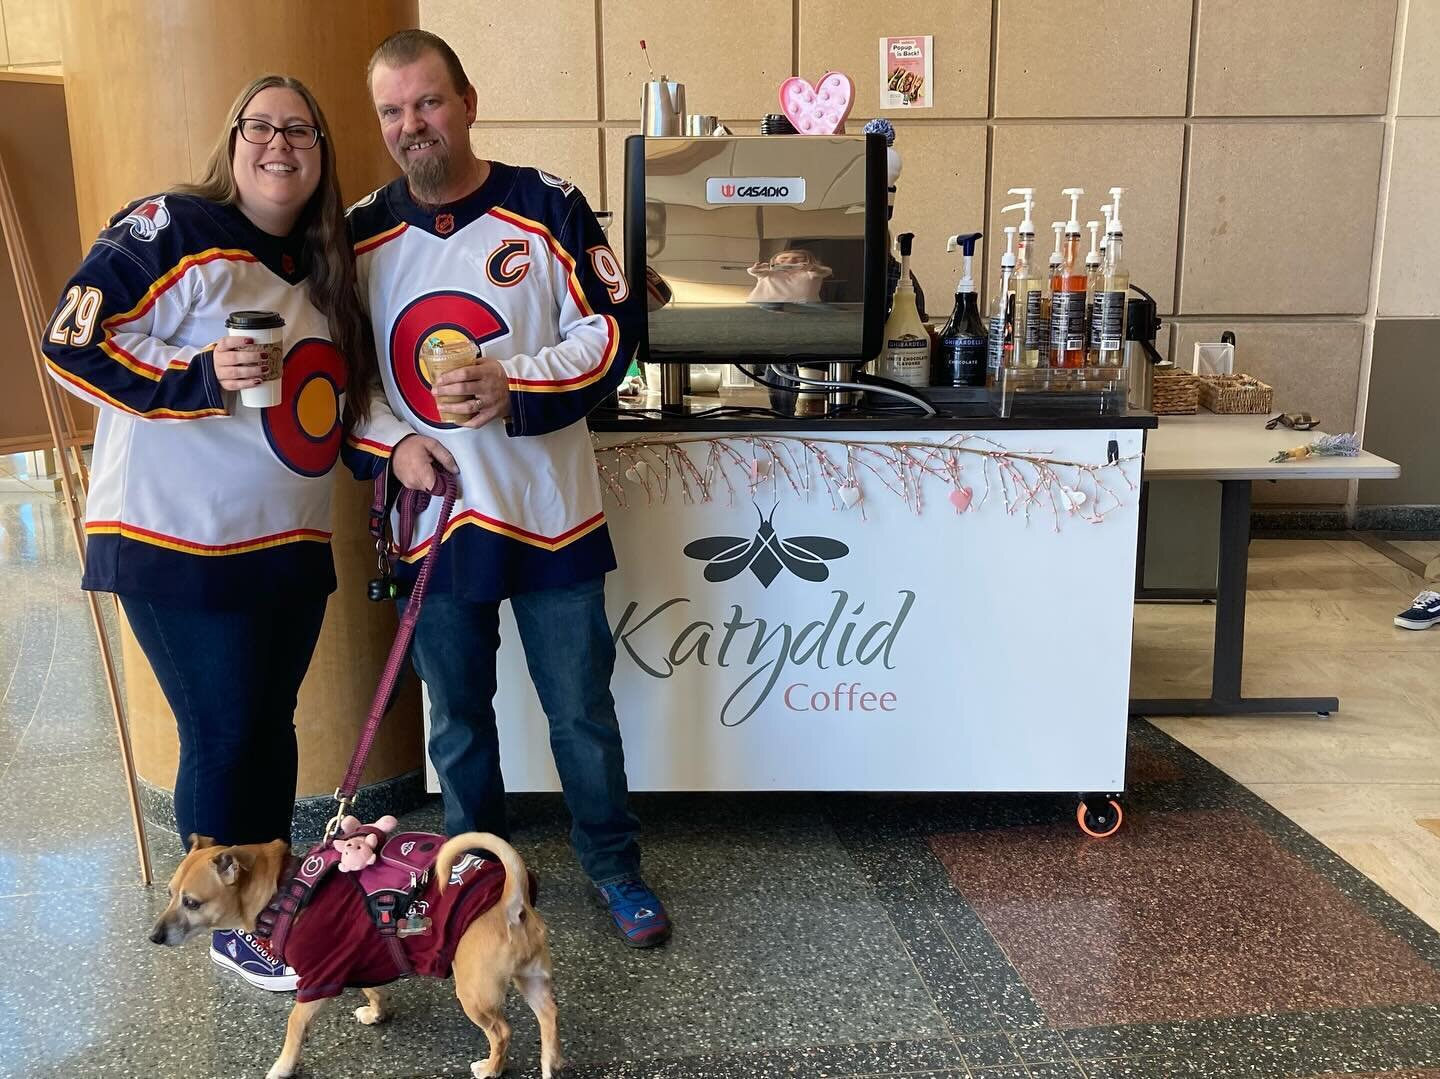 What a delight it was to meet these two after they tied the knot today with their canine companion at their side! ❤️ They enjoyed our 2-for-1 Valentine&rsquo;s Day newlywed special. And we enjoyed their Avalanche loyalty and friendly fur-baby (who ma